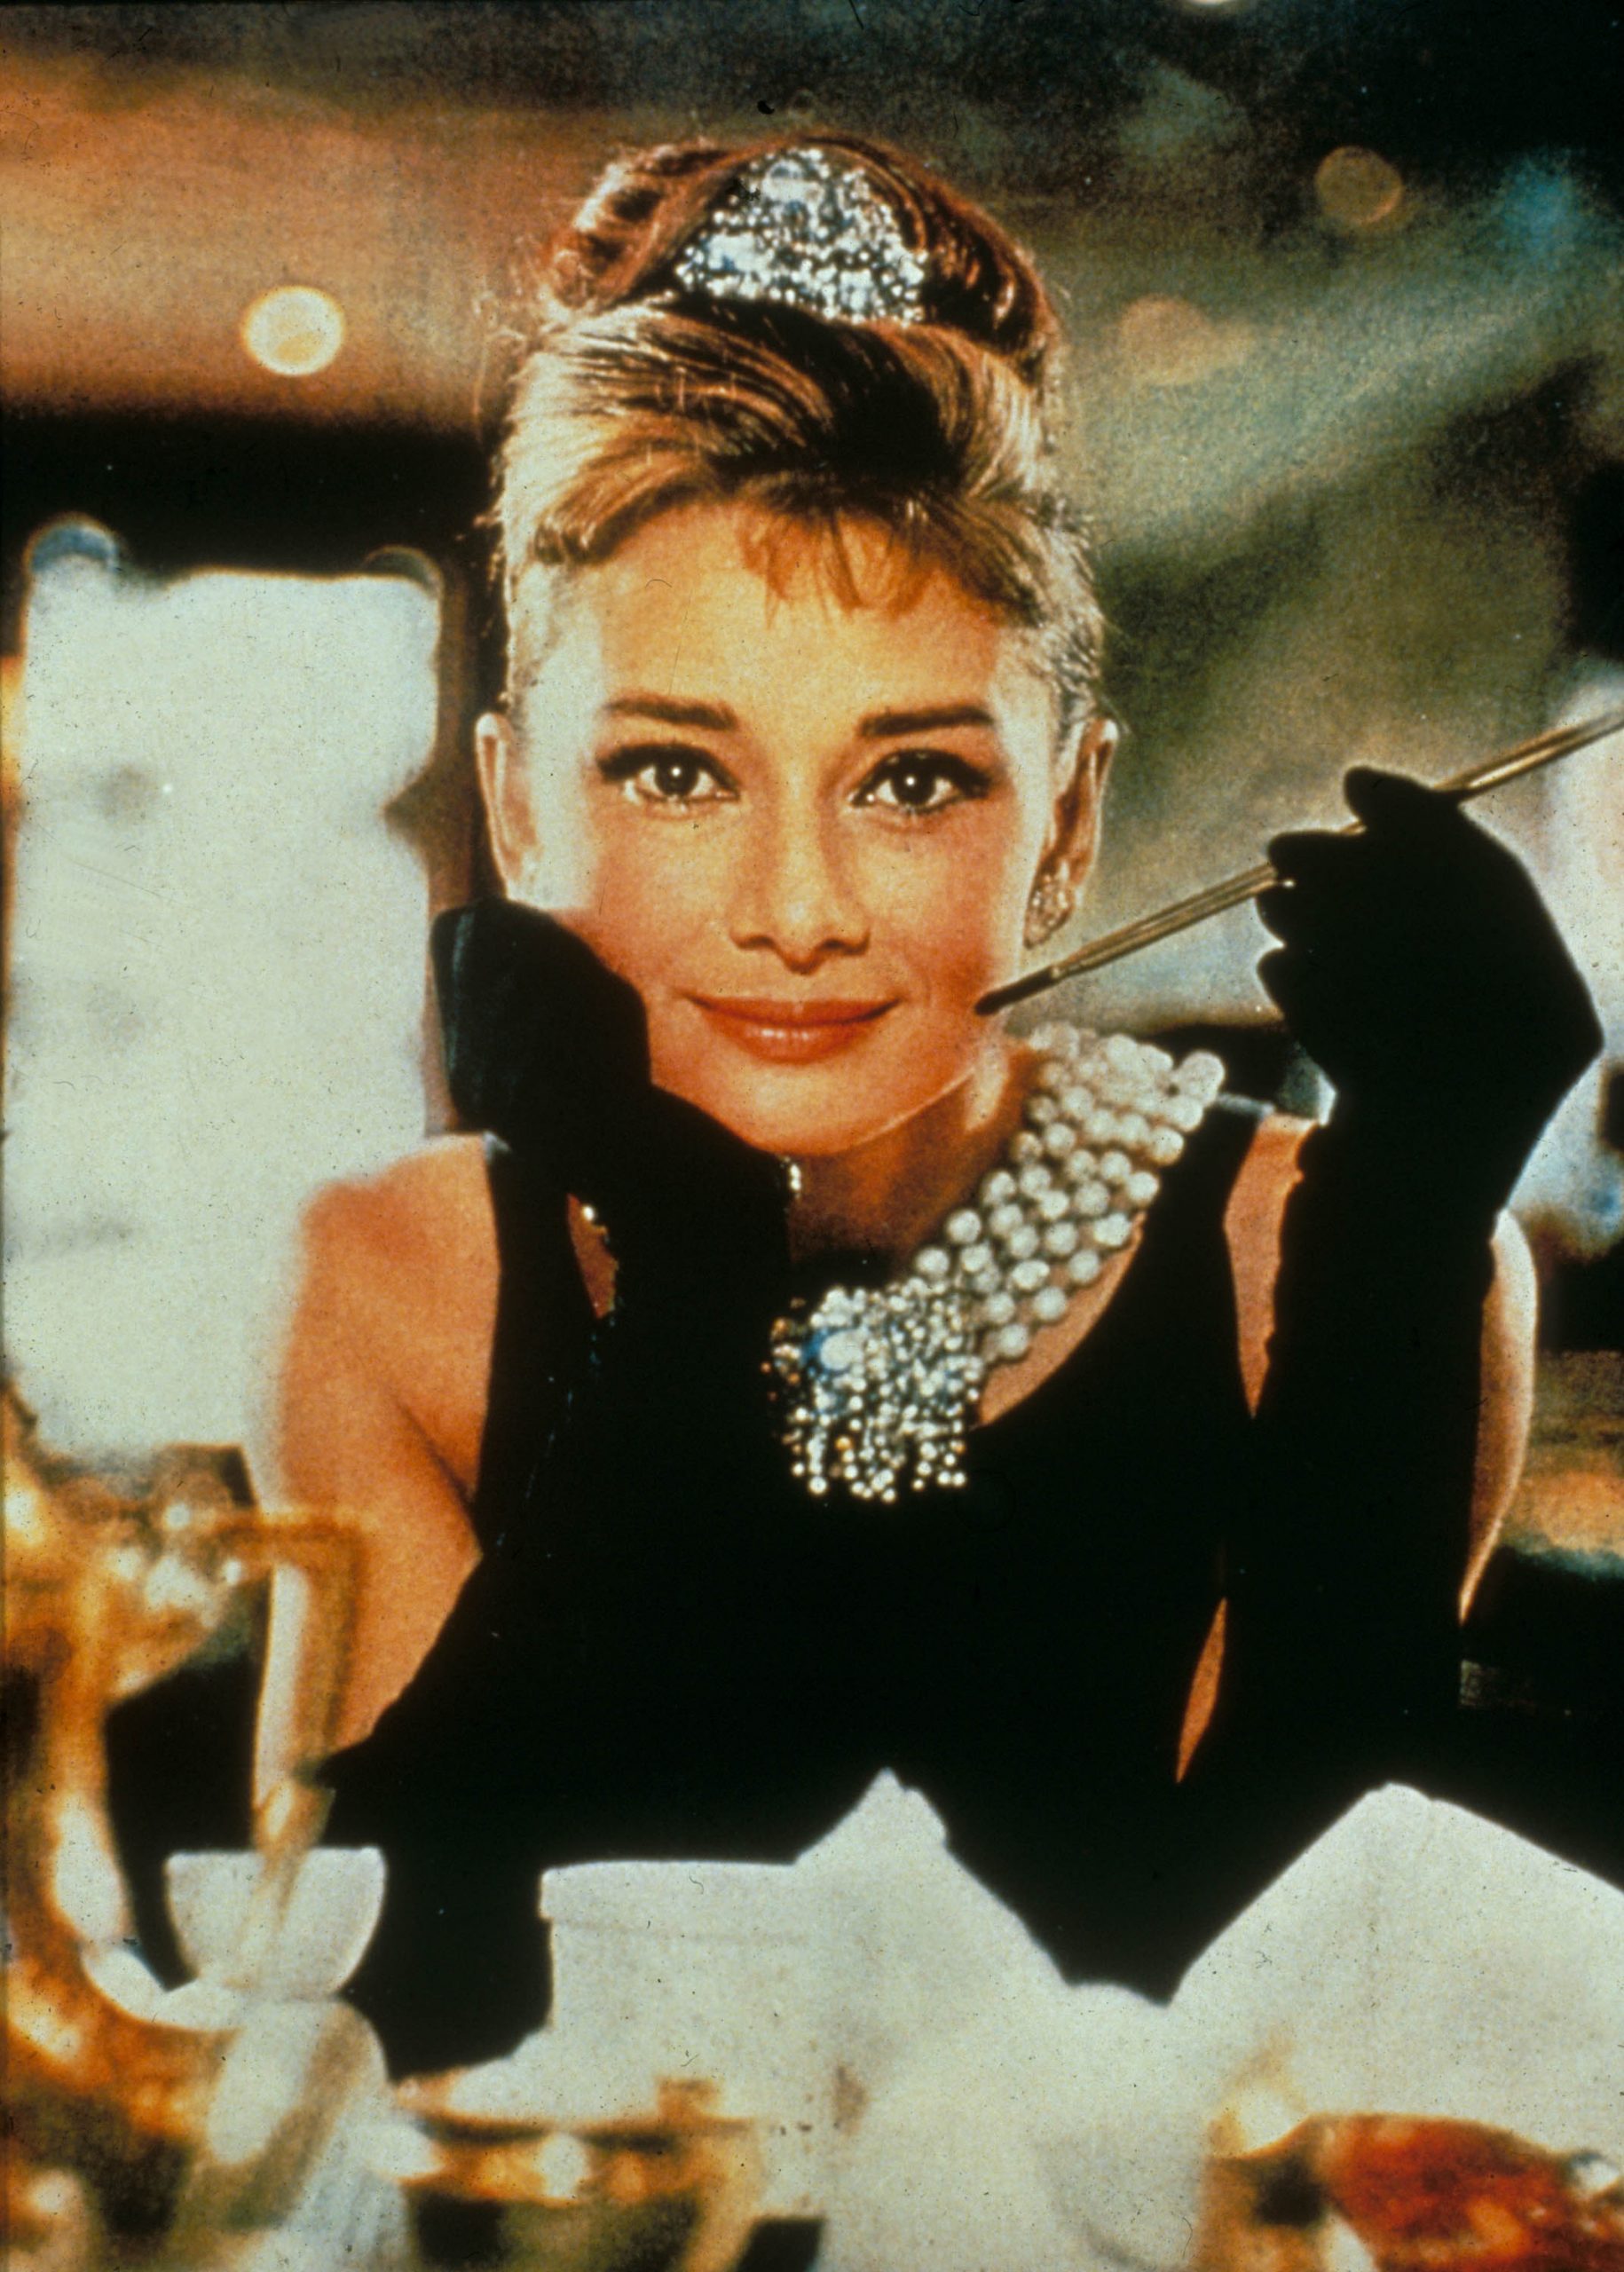 Iconic little black dresses from Audrey Hepburn to Coco Chanel